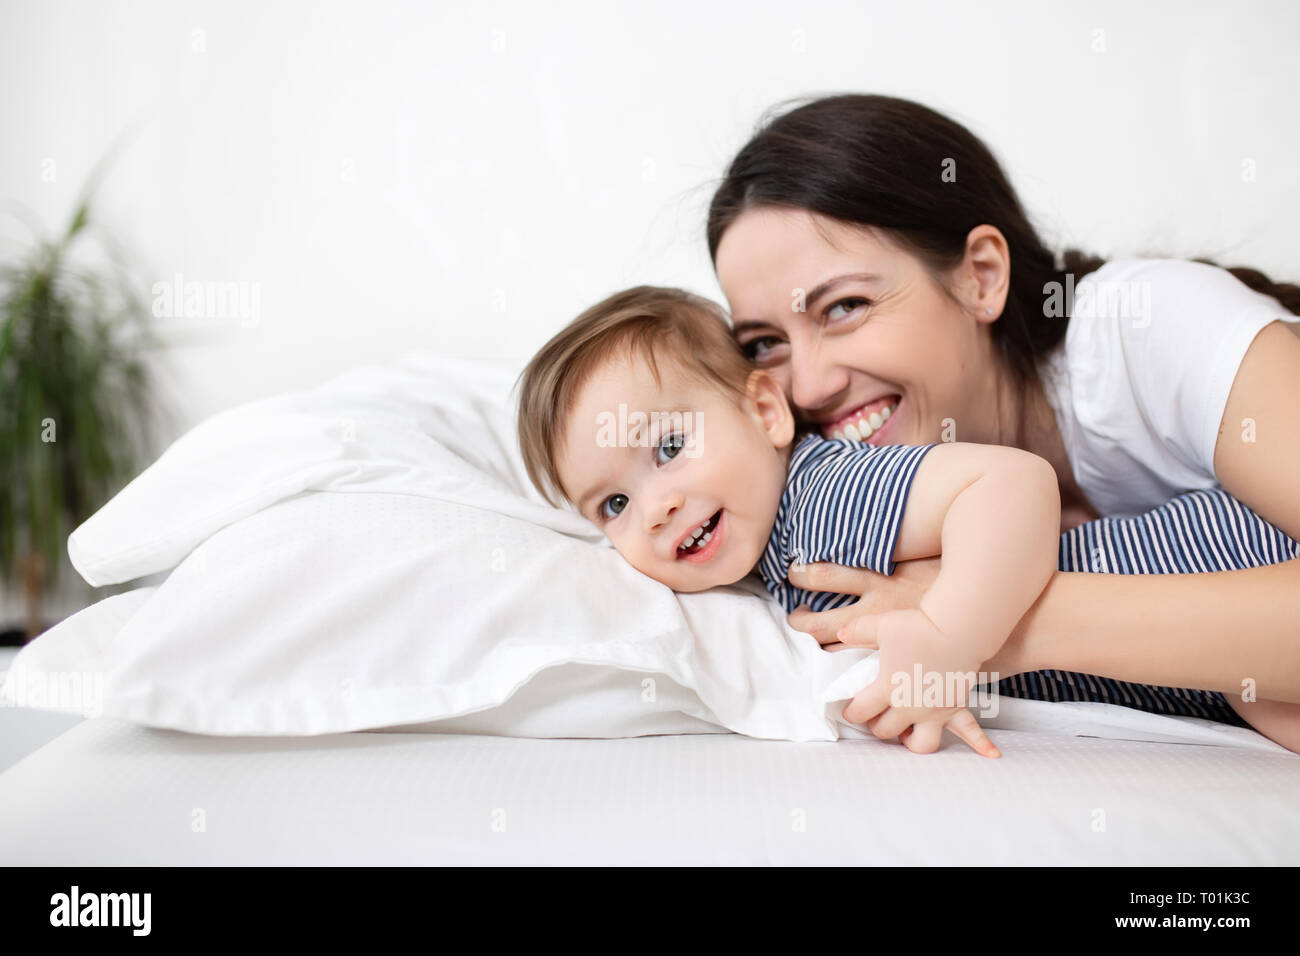 mother and baby boy on bed Stock Photo